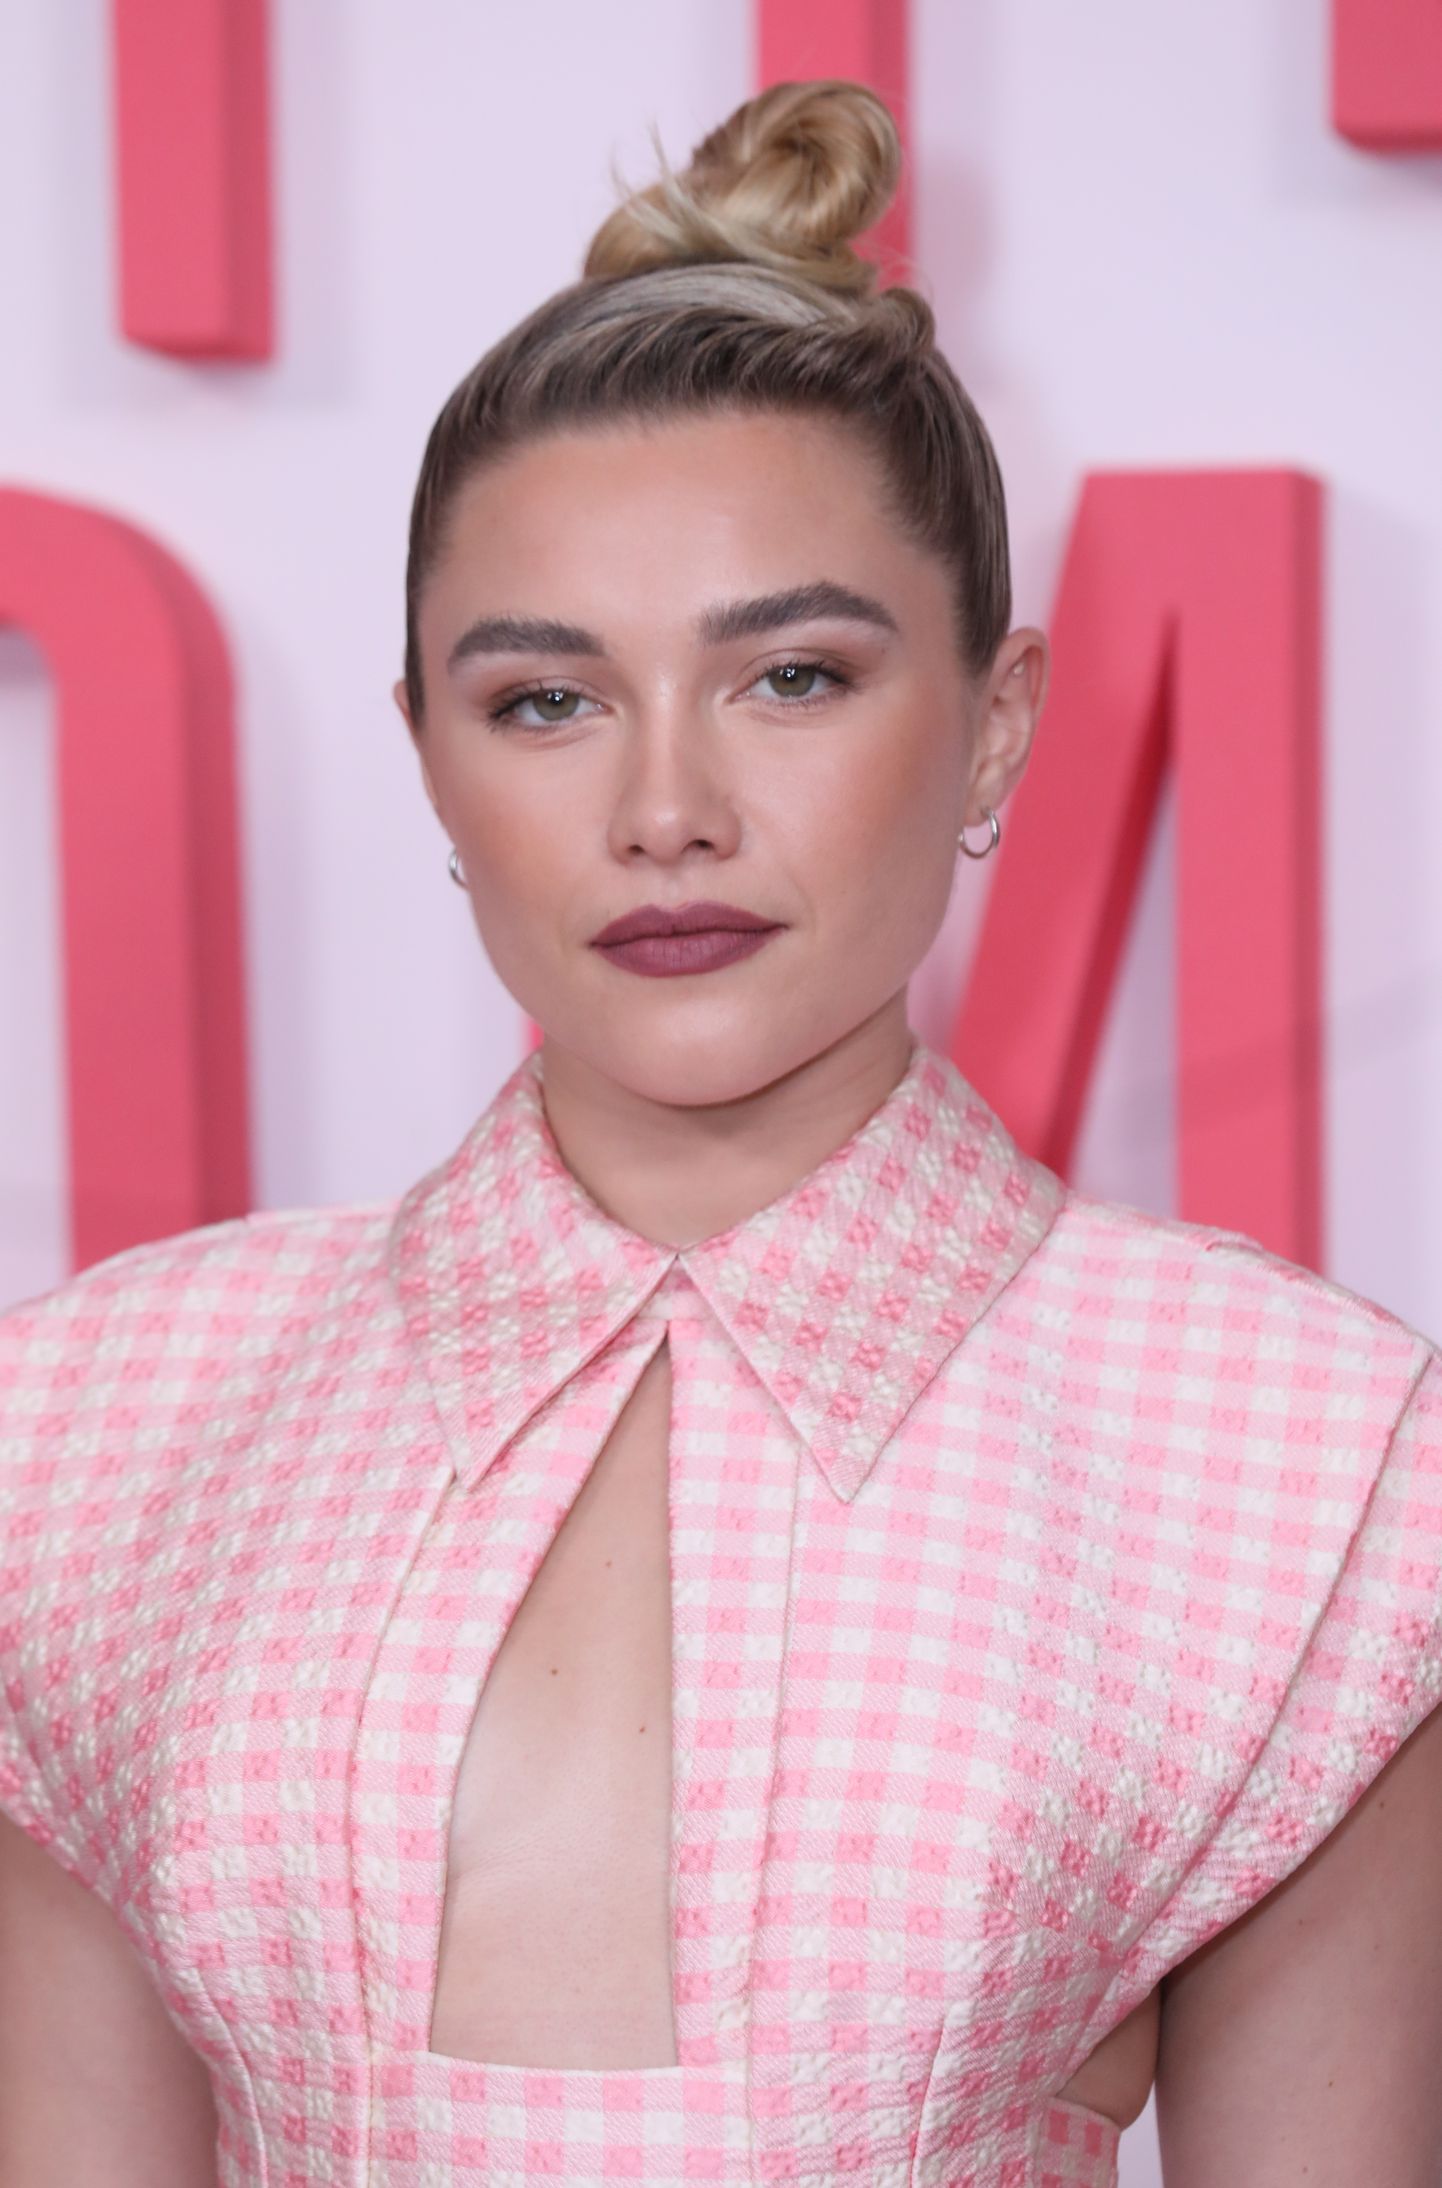 Florence Pugh attending a photocall for Little Women held at The Soho Hotel, central London.